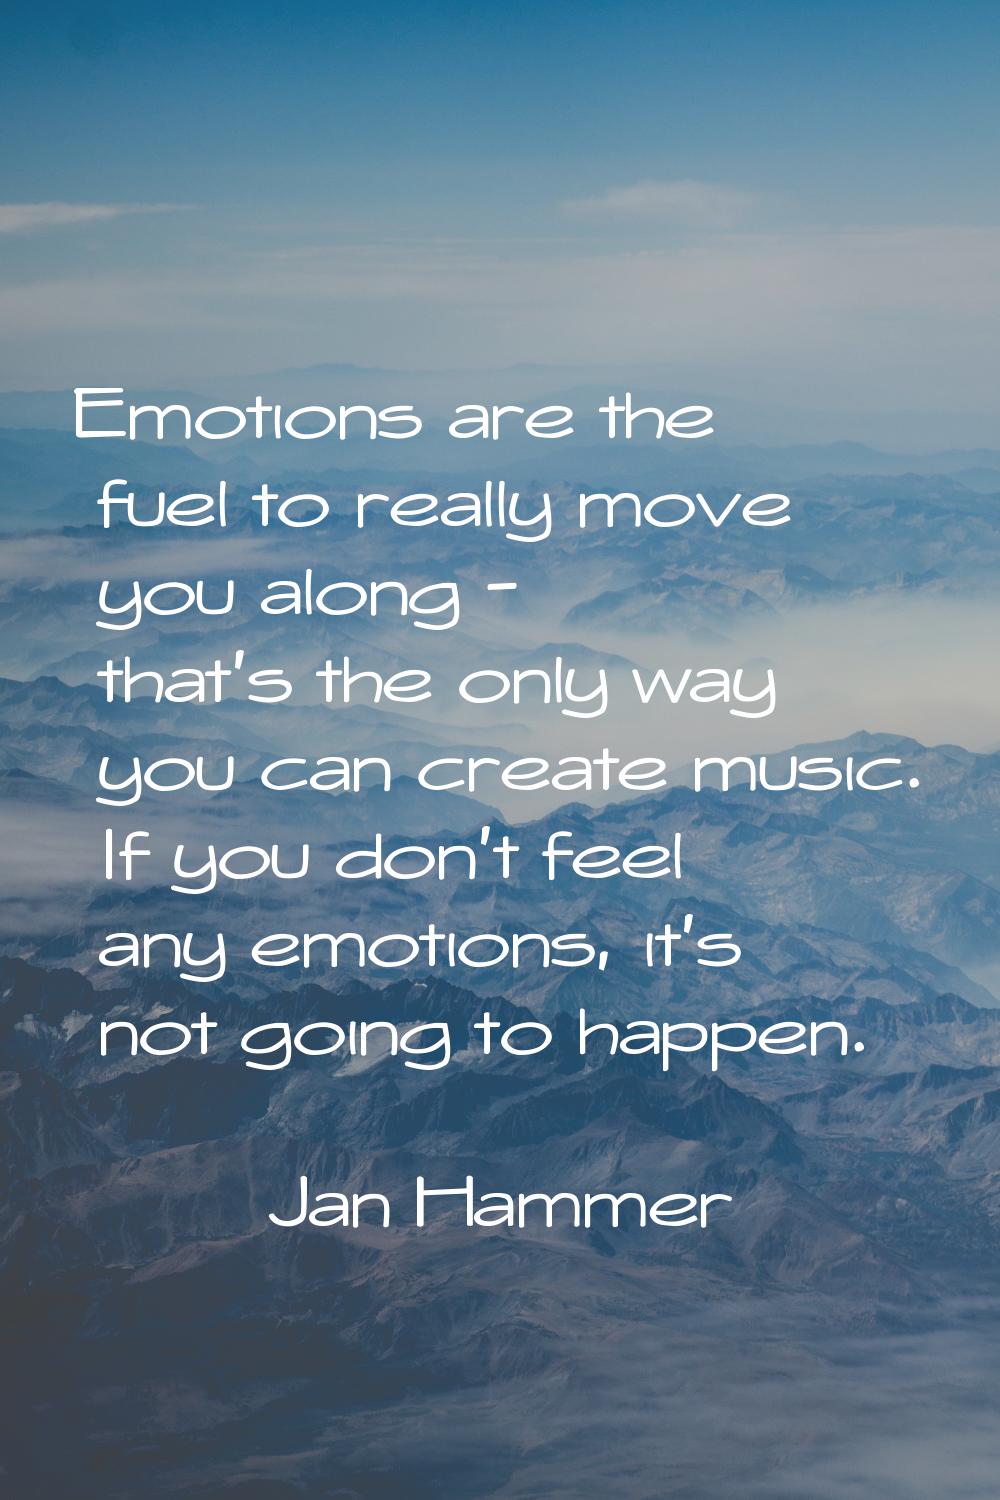 Emotions are the fuel to really move you along - that's the only way you can create music. If you d